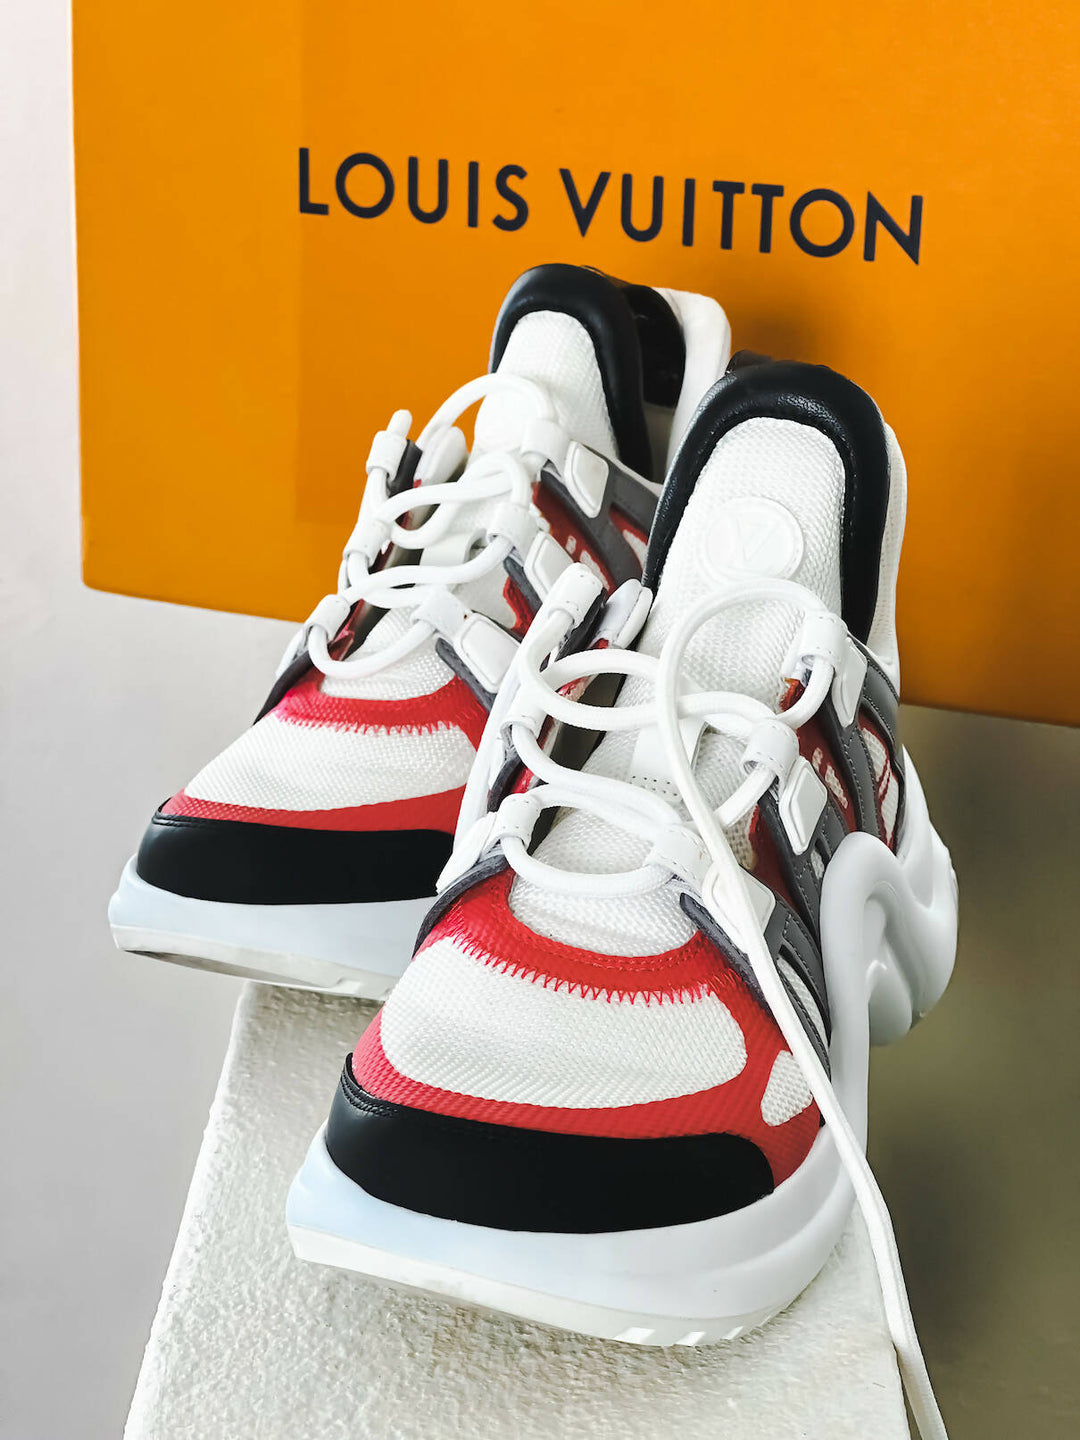 Archlight cloth trainers Louis Vuitton Green size 38 EU in Cloth